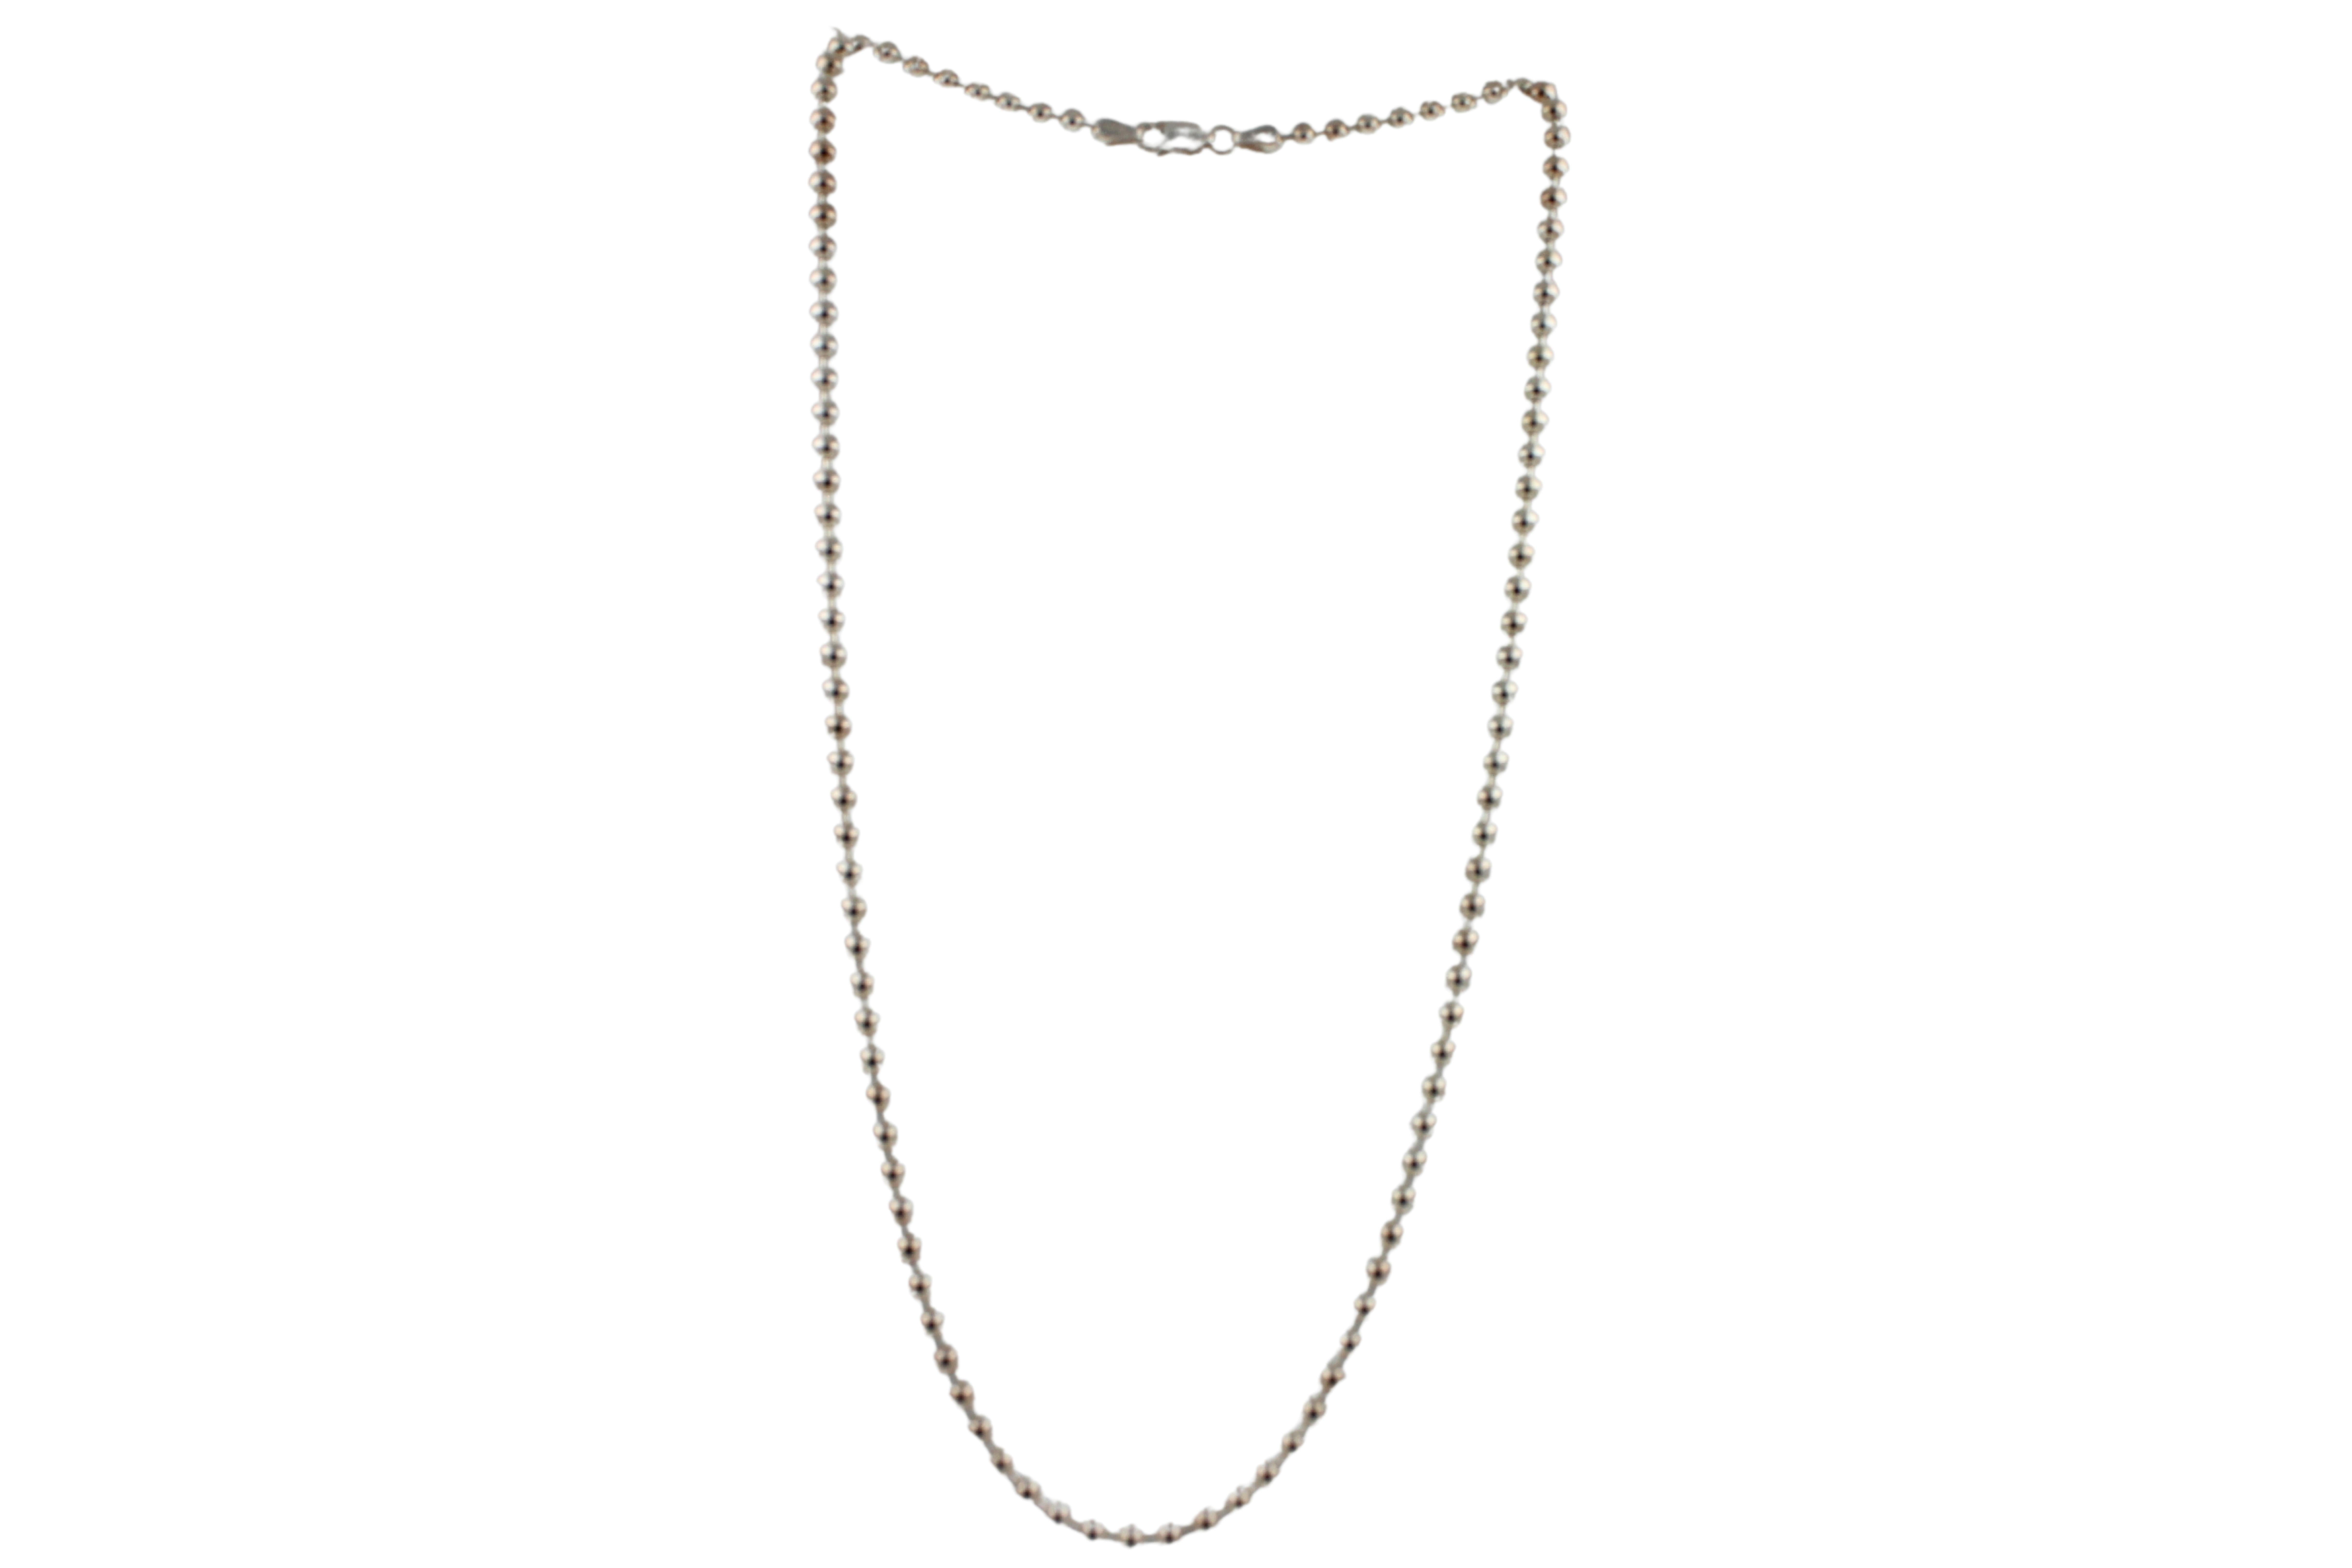 Large Ball Bead Beaded Fancy Link 925 Sterling Silver Chain Necklace
•	18 inches length
•	9.75 grams
•	2.1 mm width 
•	White Rhodium Plate Finish

